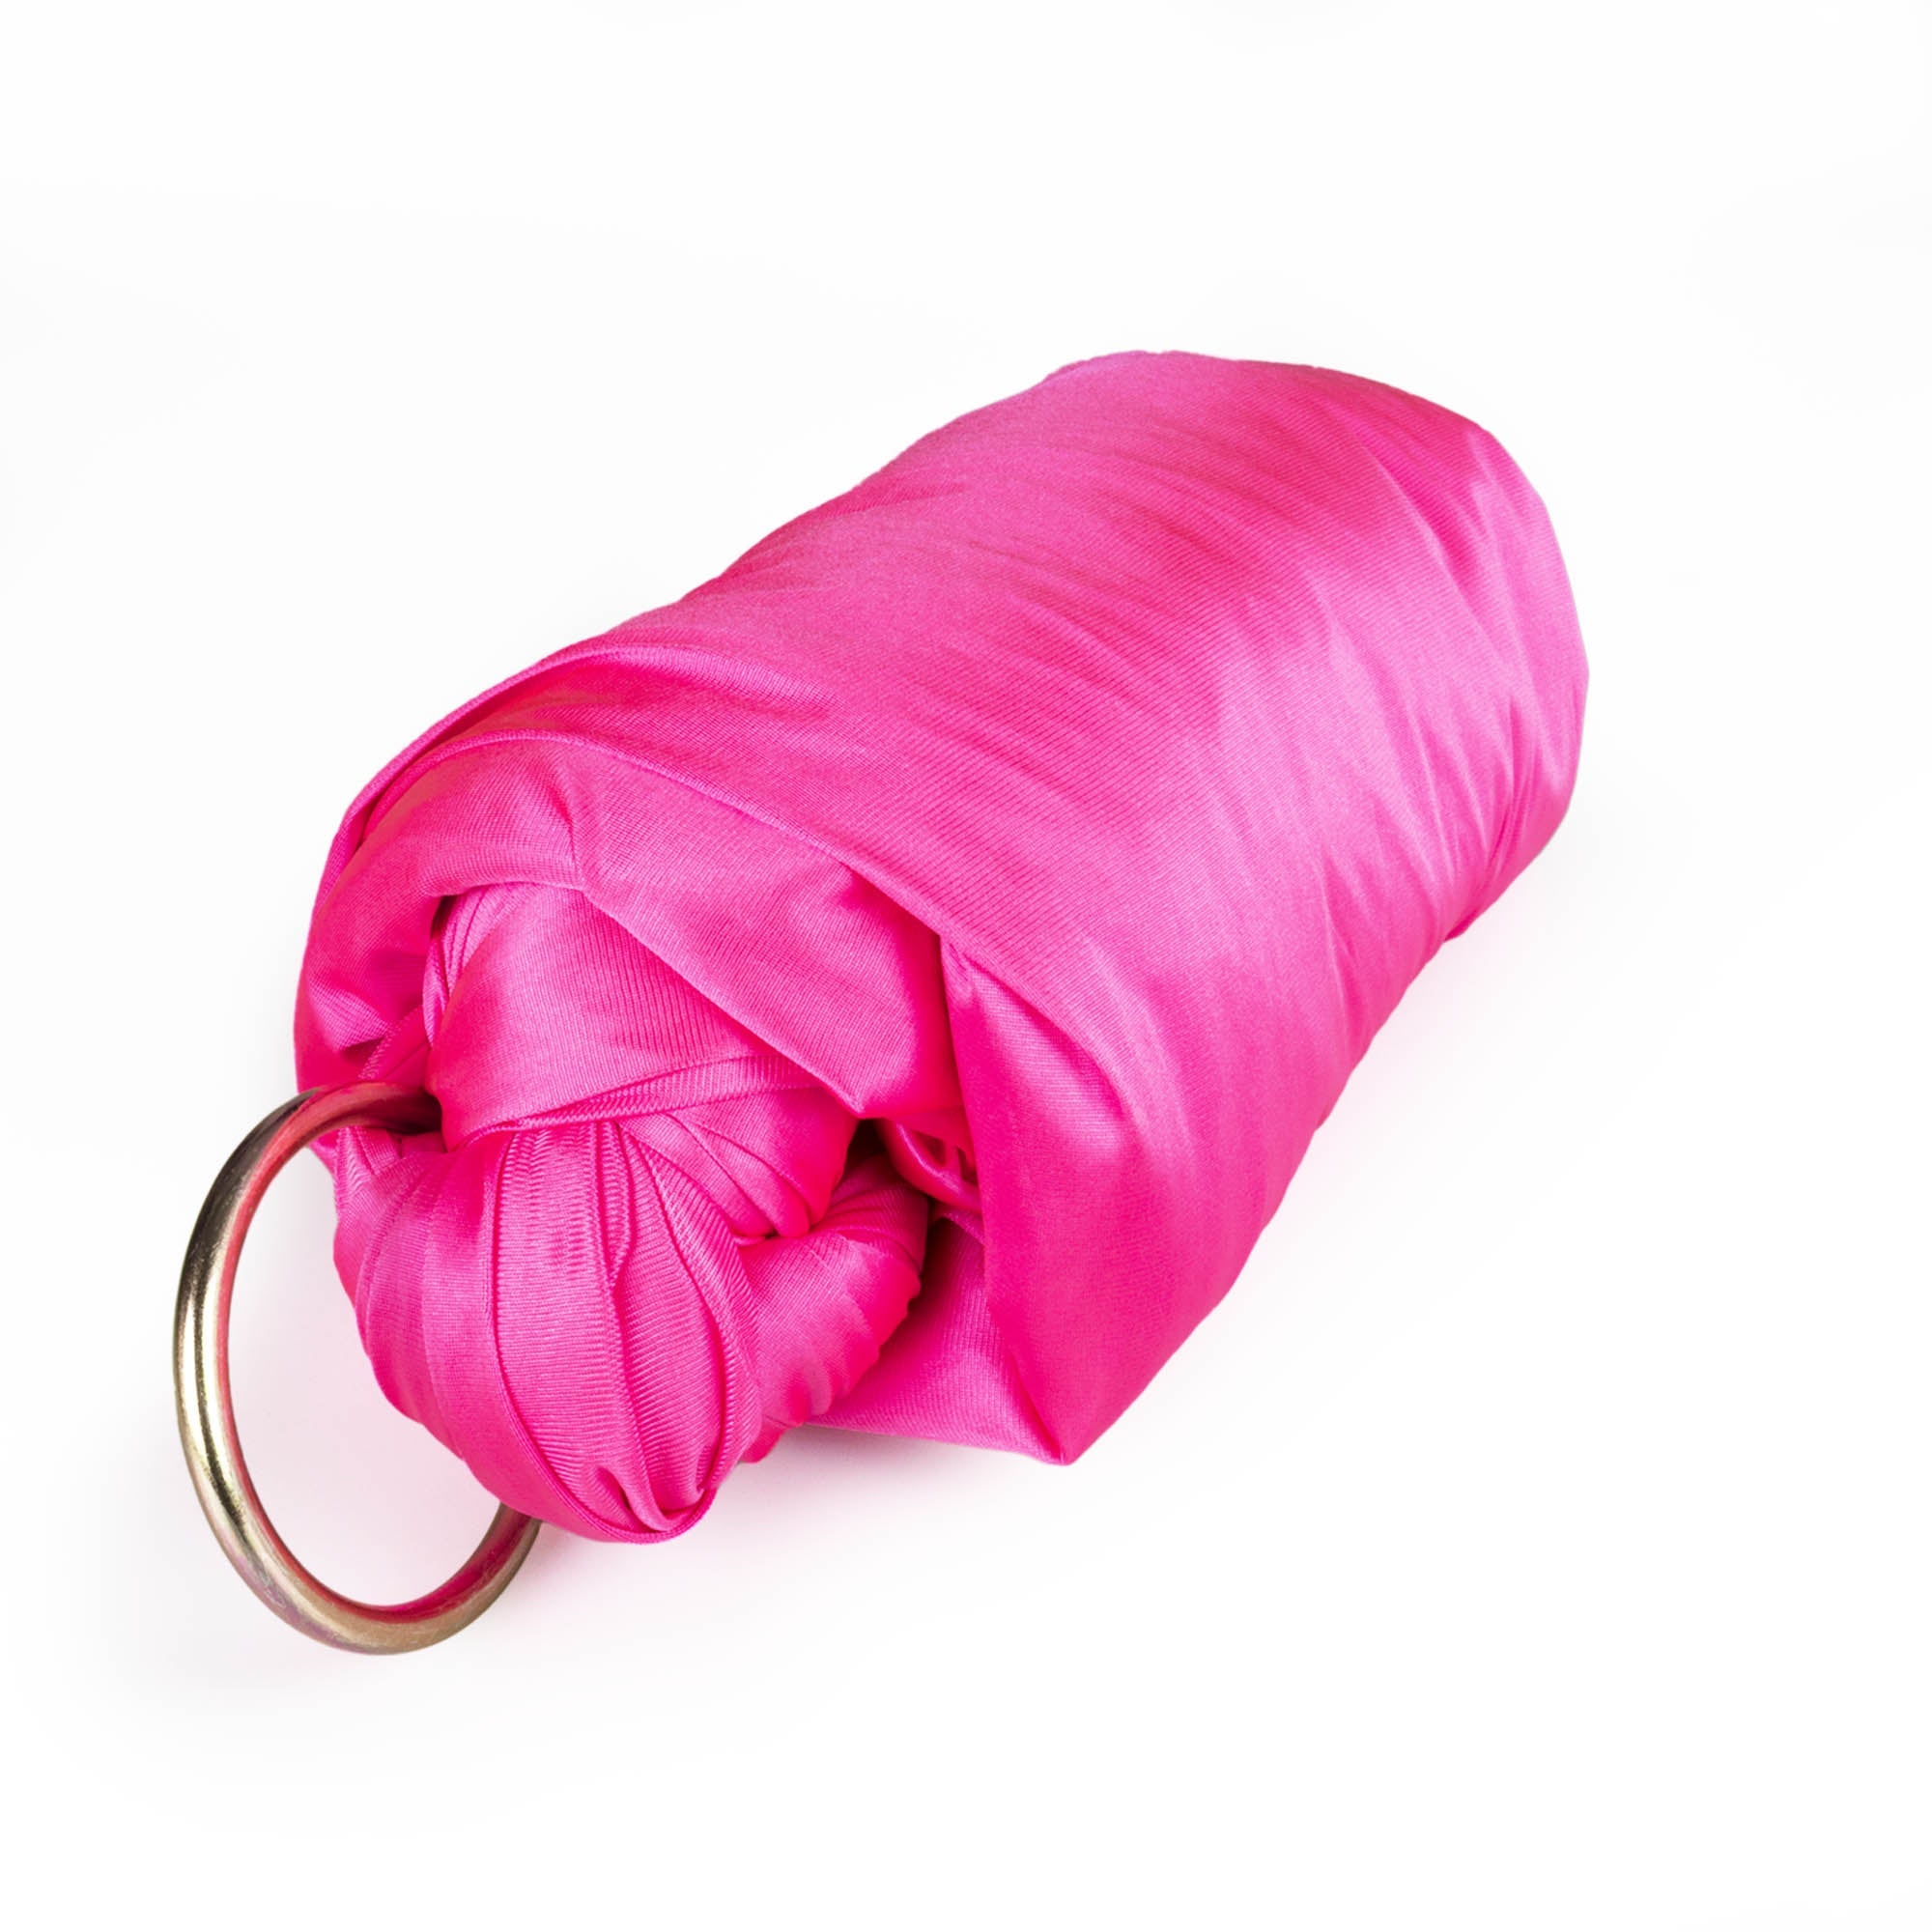 Pink yoga hammock rolled up with rings attached